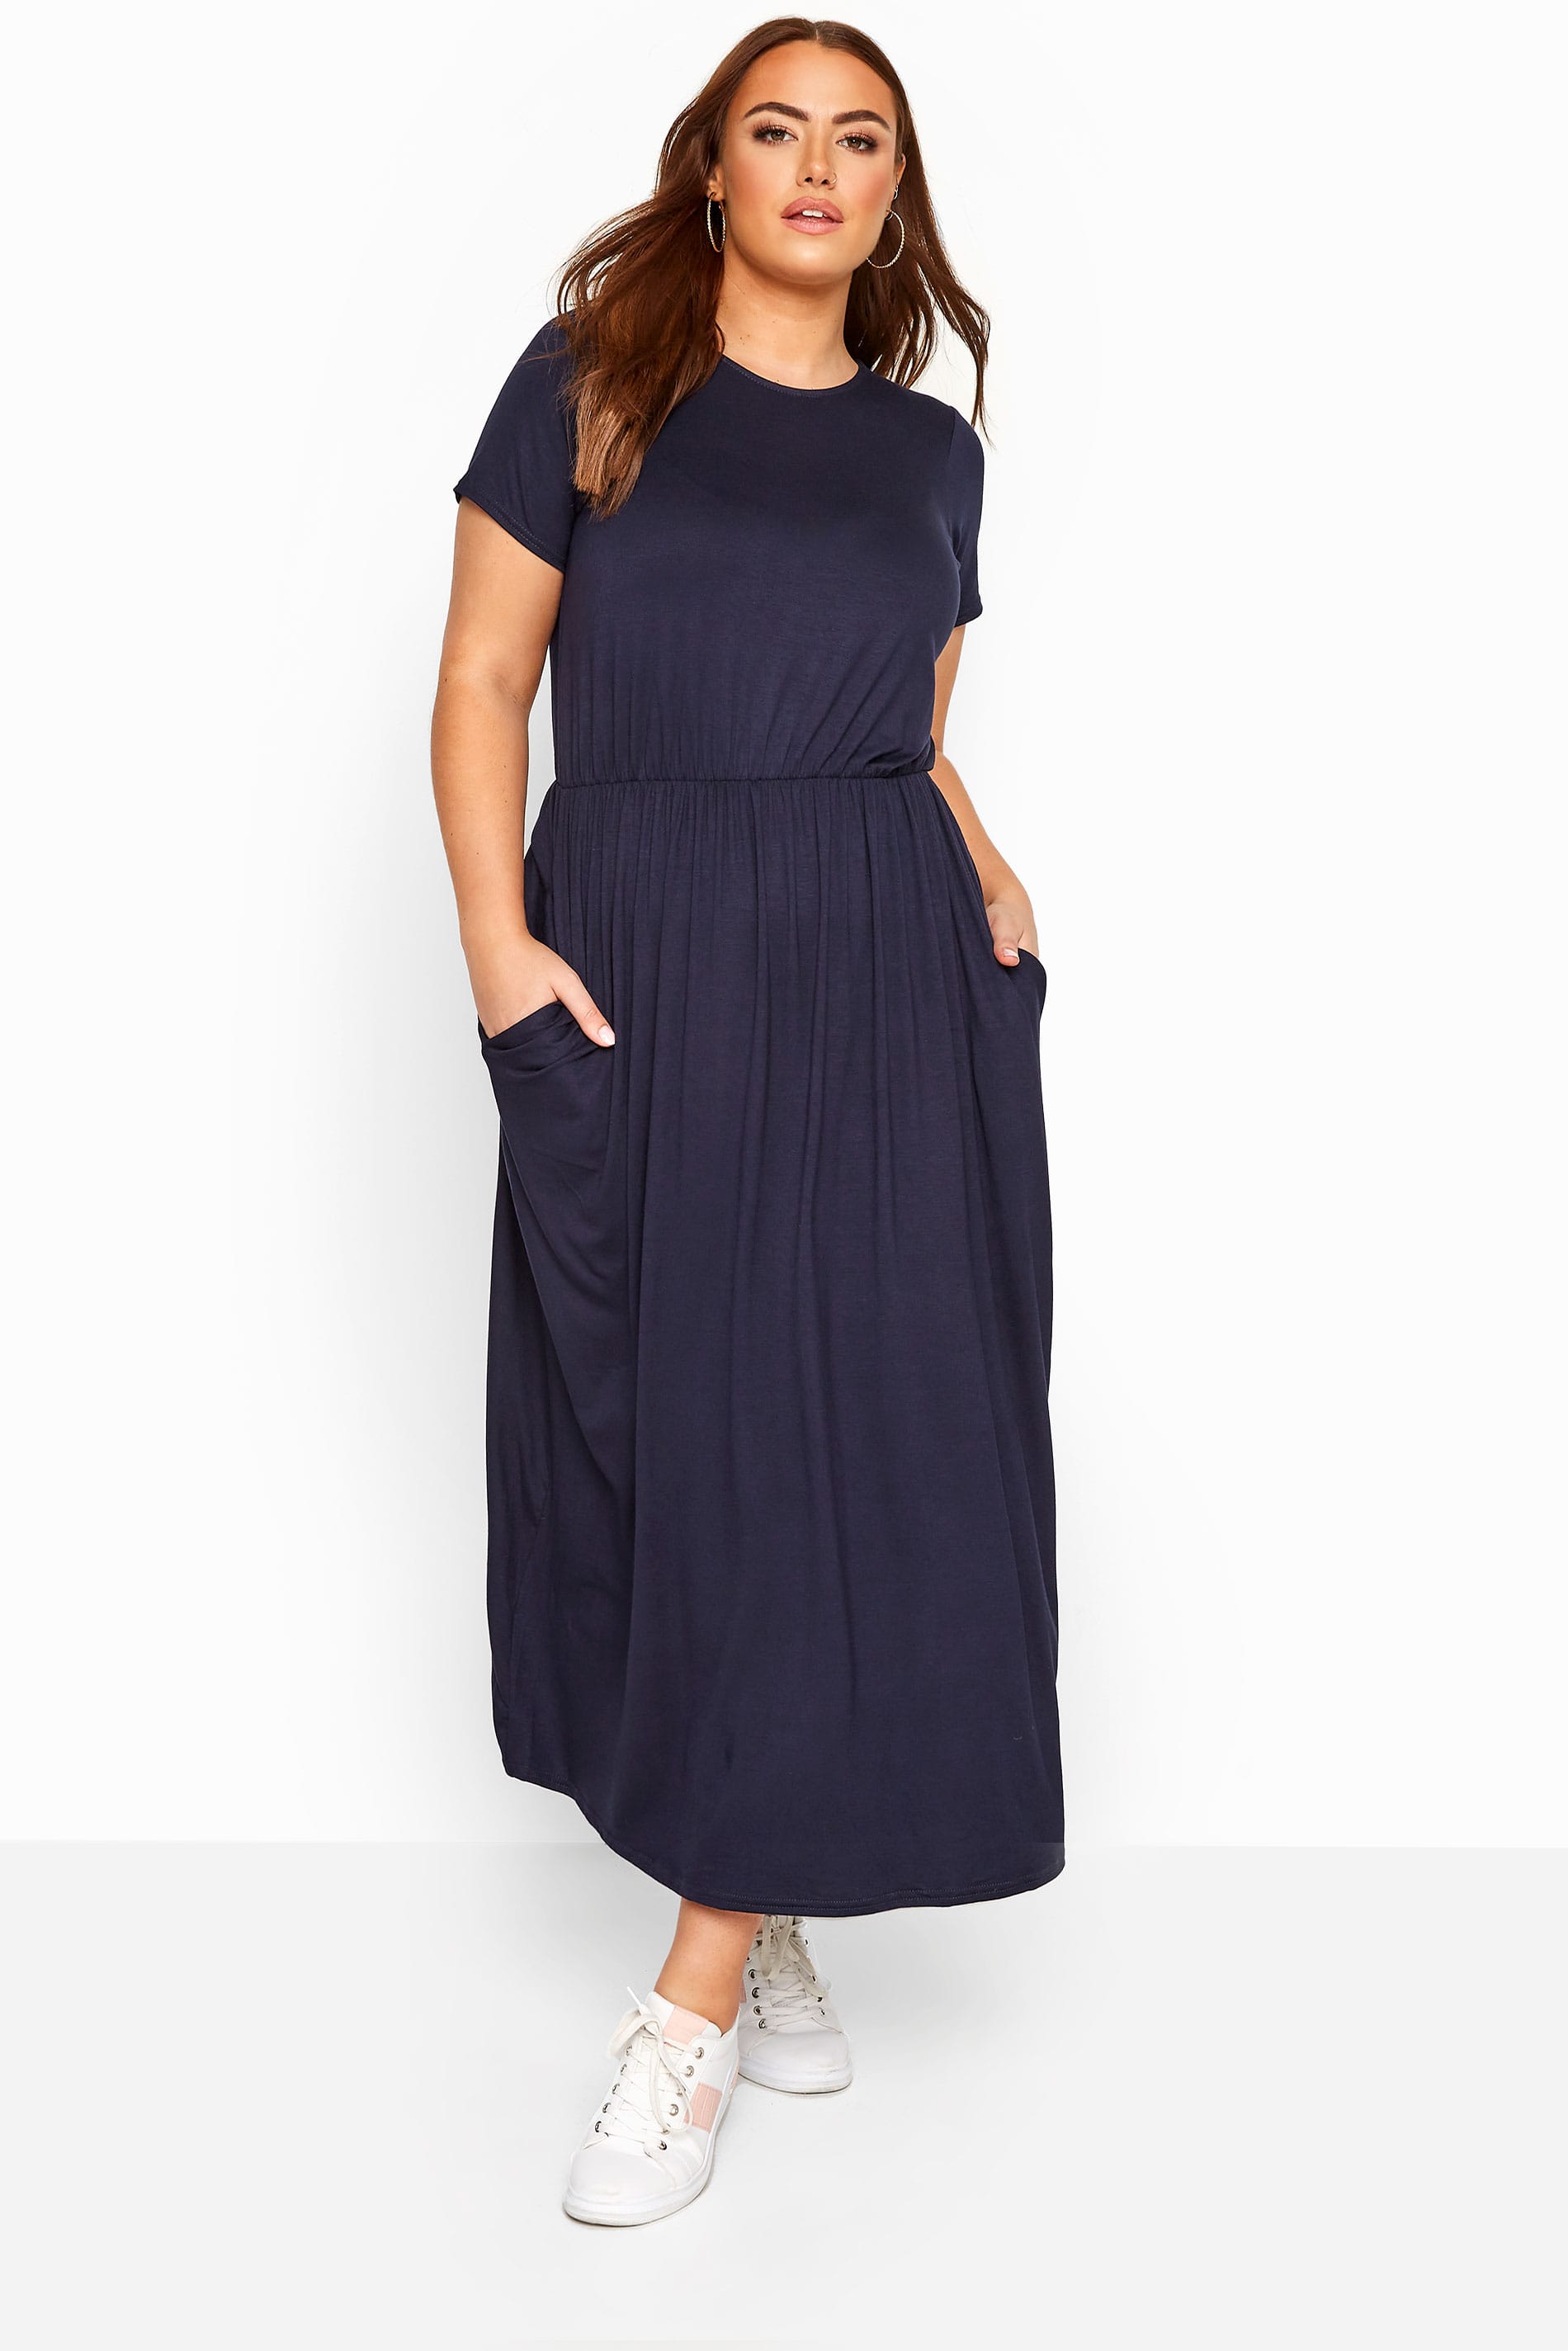 YOURS LONDON Navy Pocket Maxi Dress | Yours Clothing